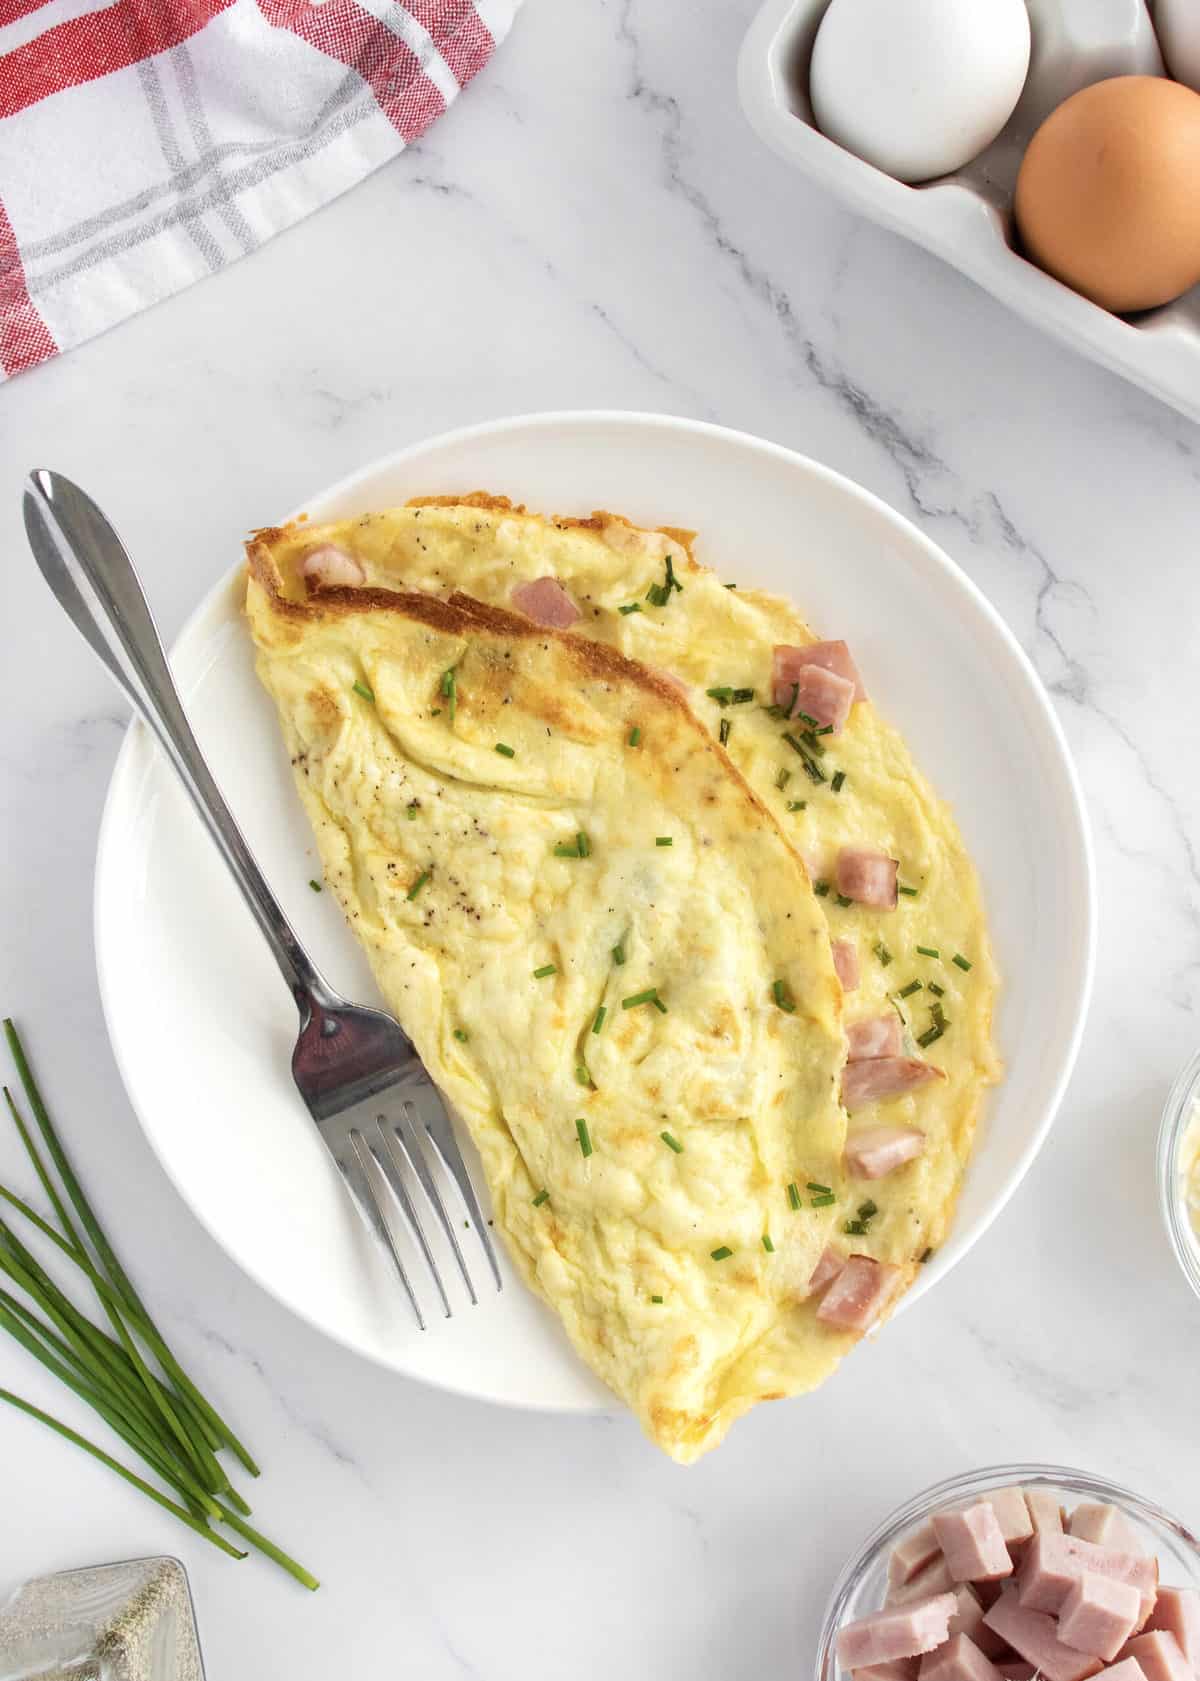 How to Make an Omelet by The BakerMama